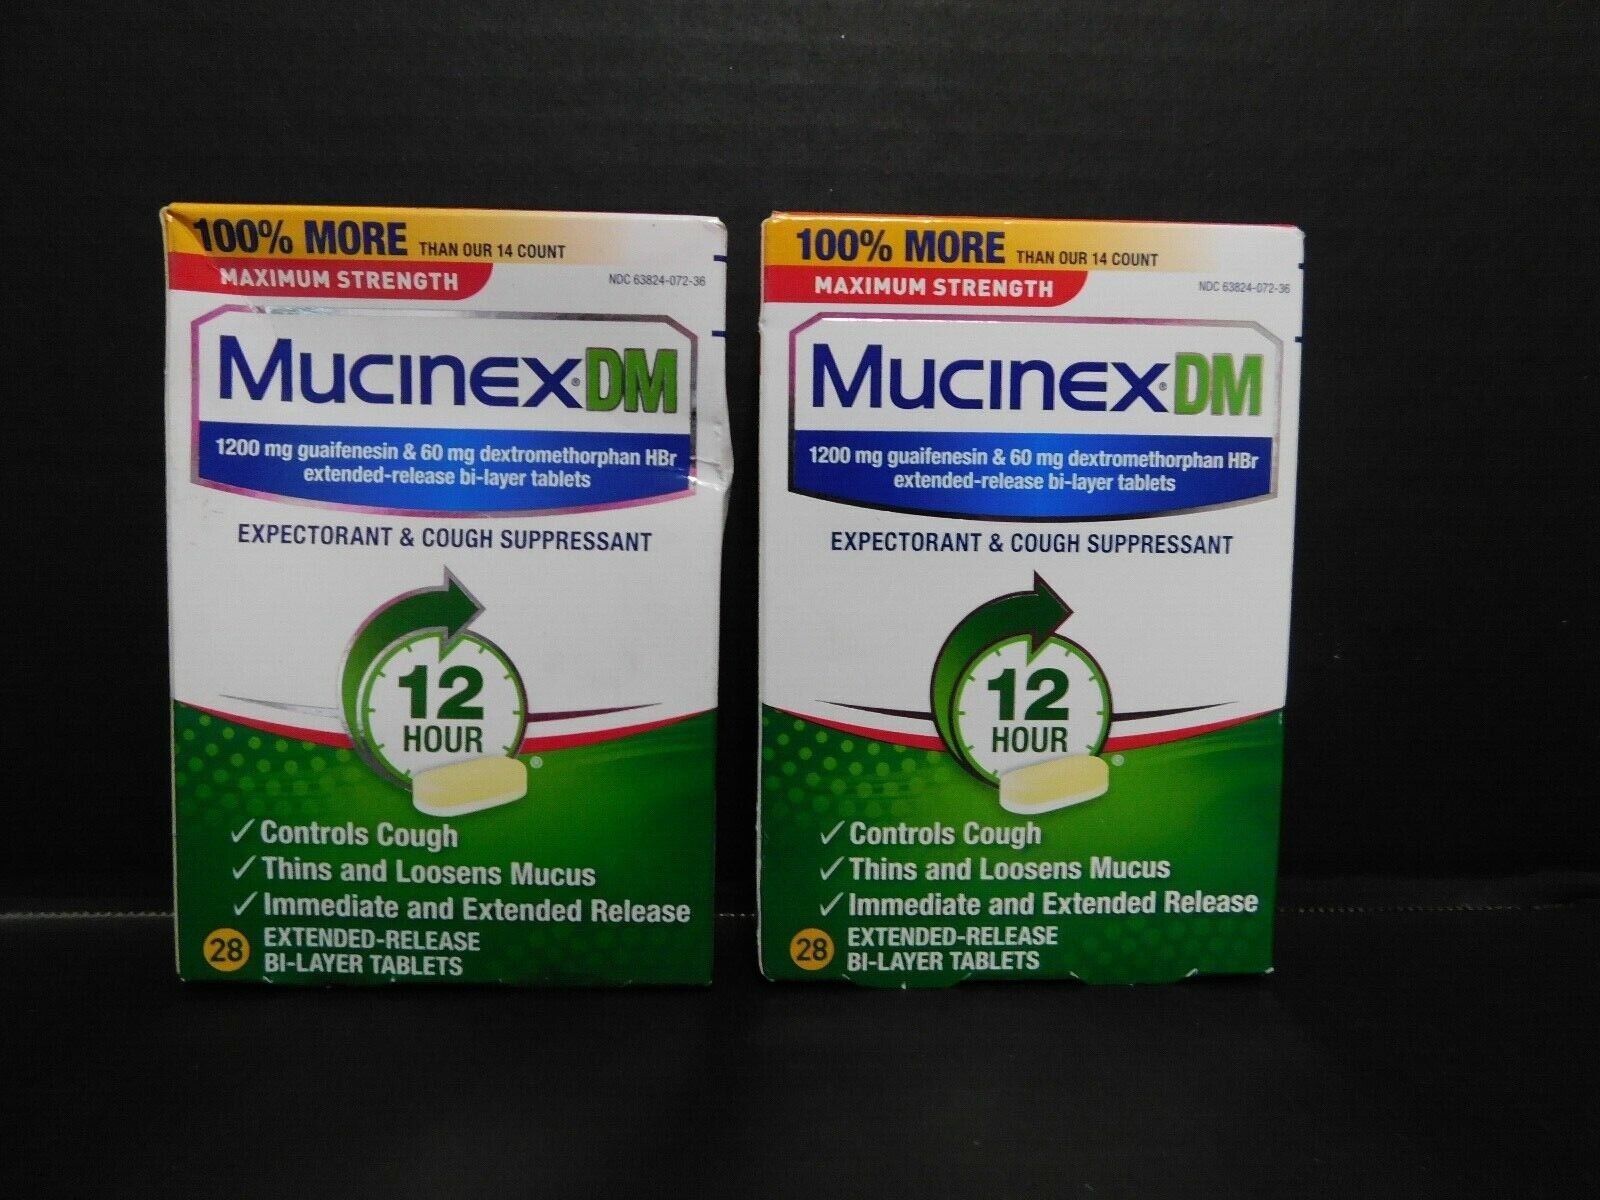 2- Mucinex Max 55% OFF DM Expectorant Cough Suppressant 56 Tablets 23 1 New product! New type 6 Total